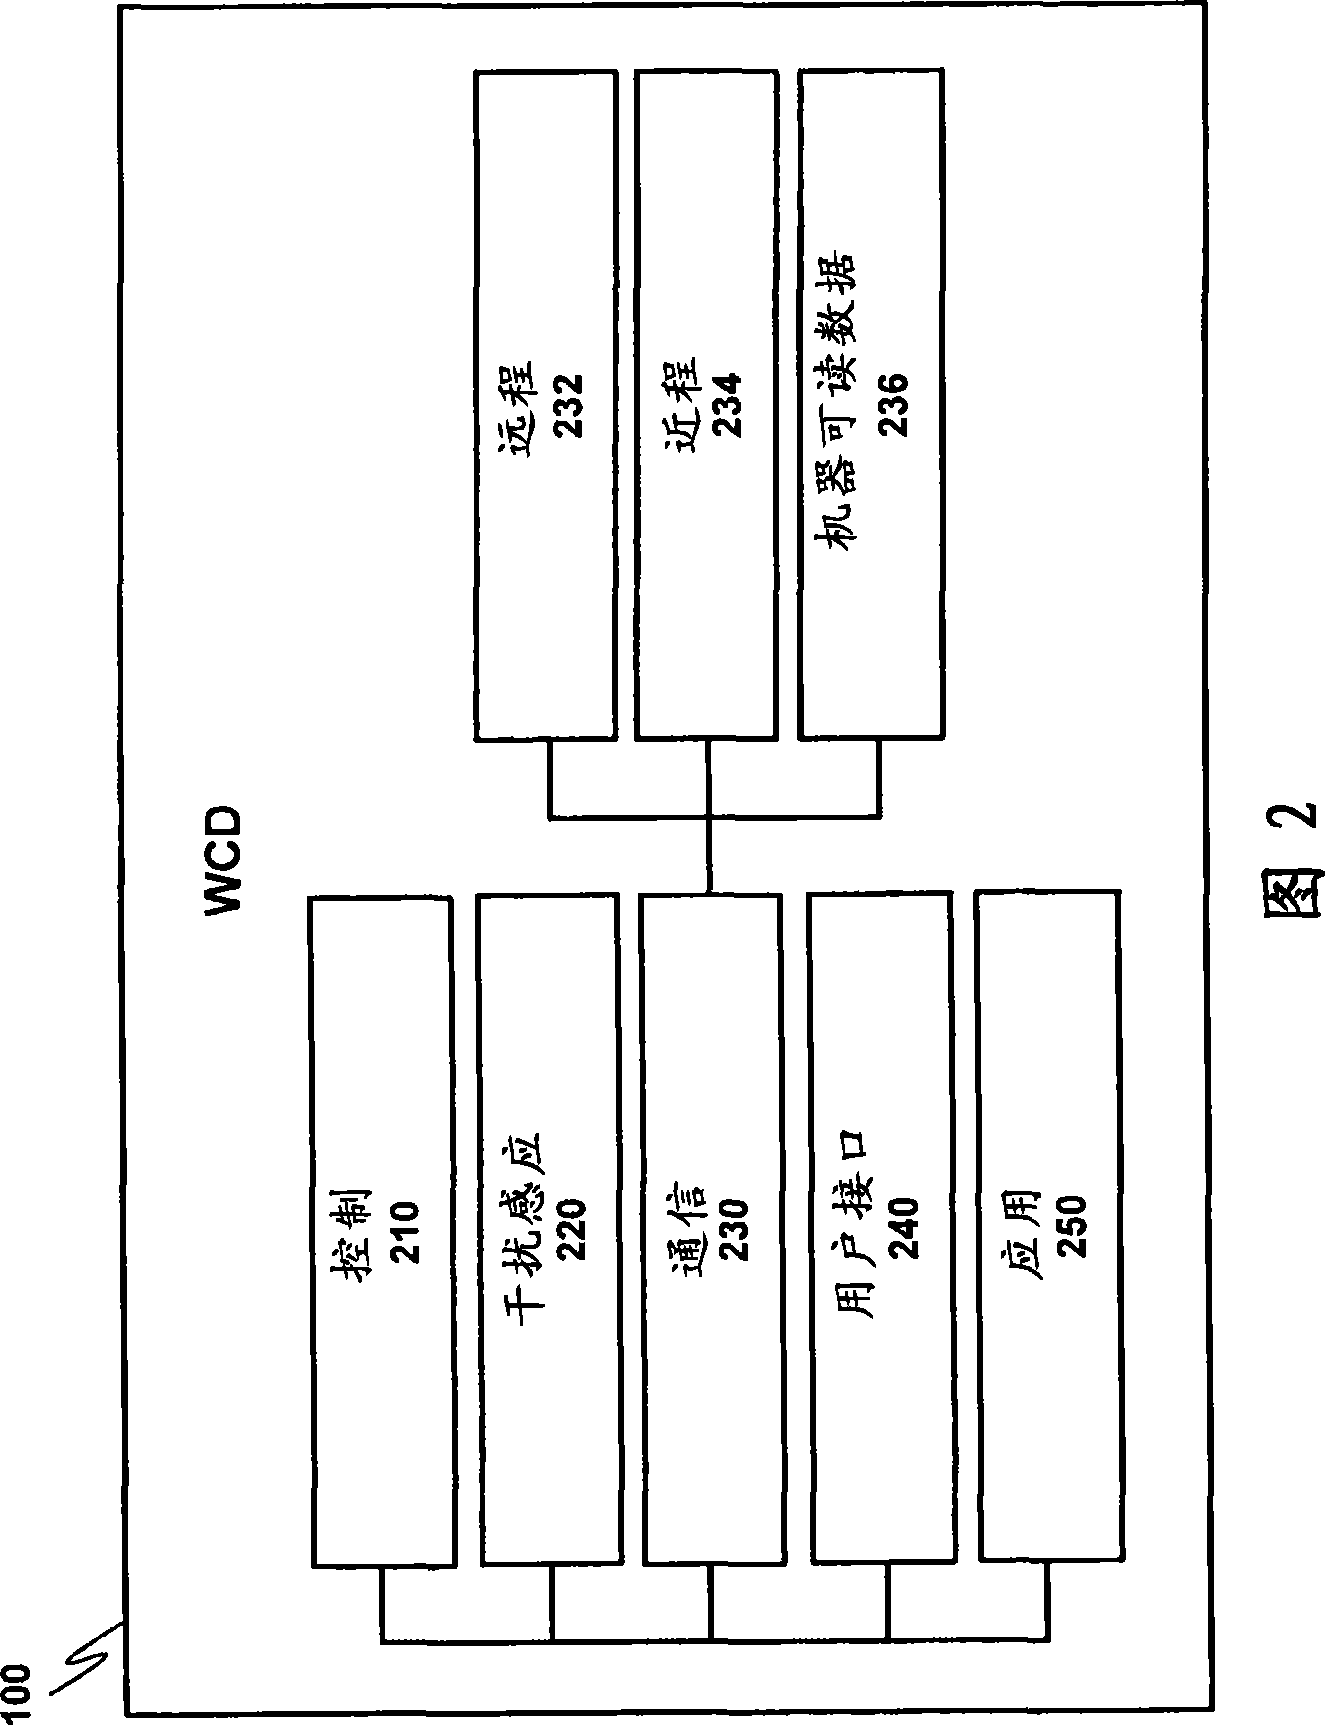 Controlling radio modems in a device to avoid interference